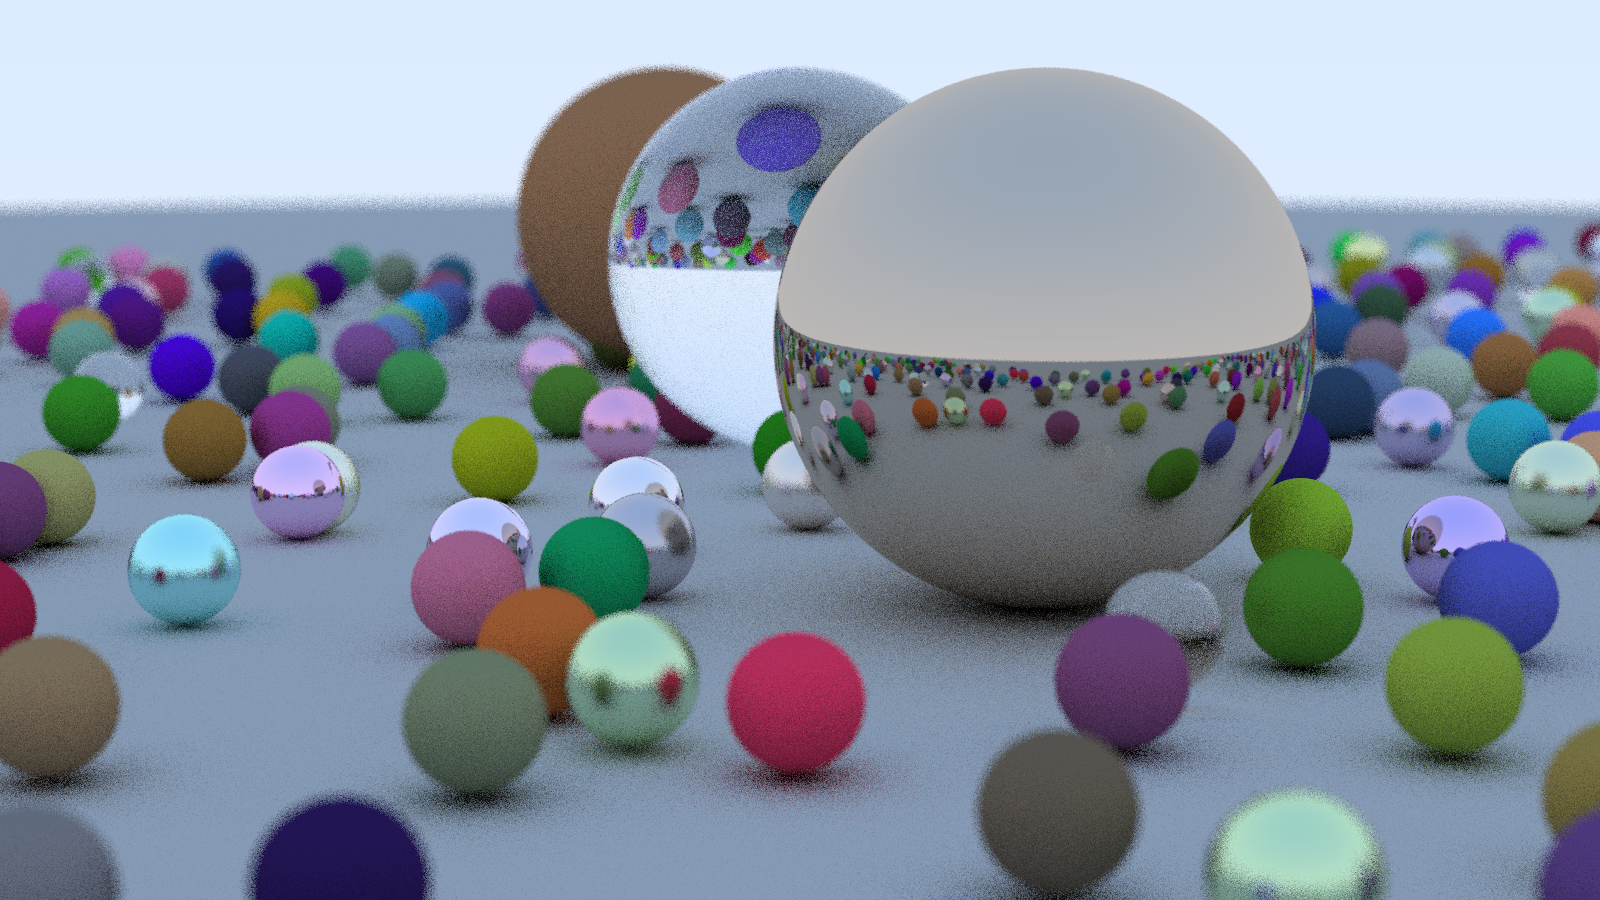 Rendering of balls of various sizes and materials